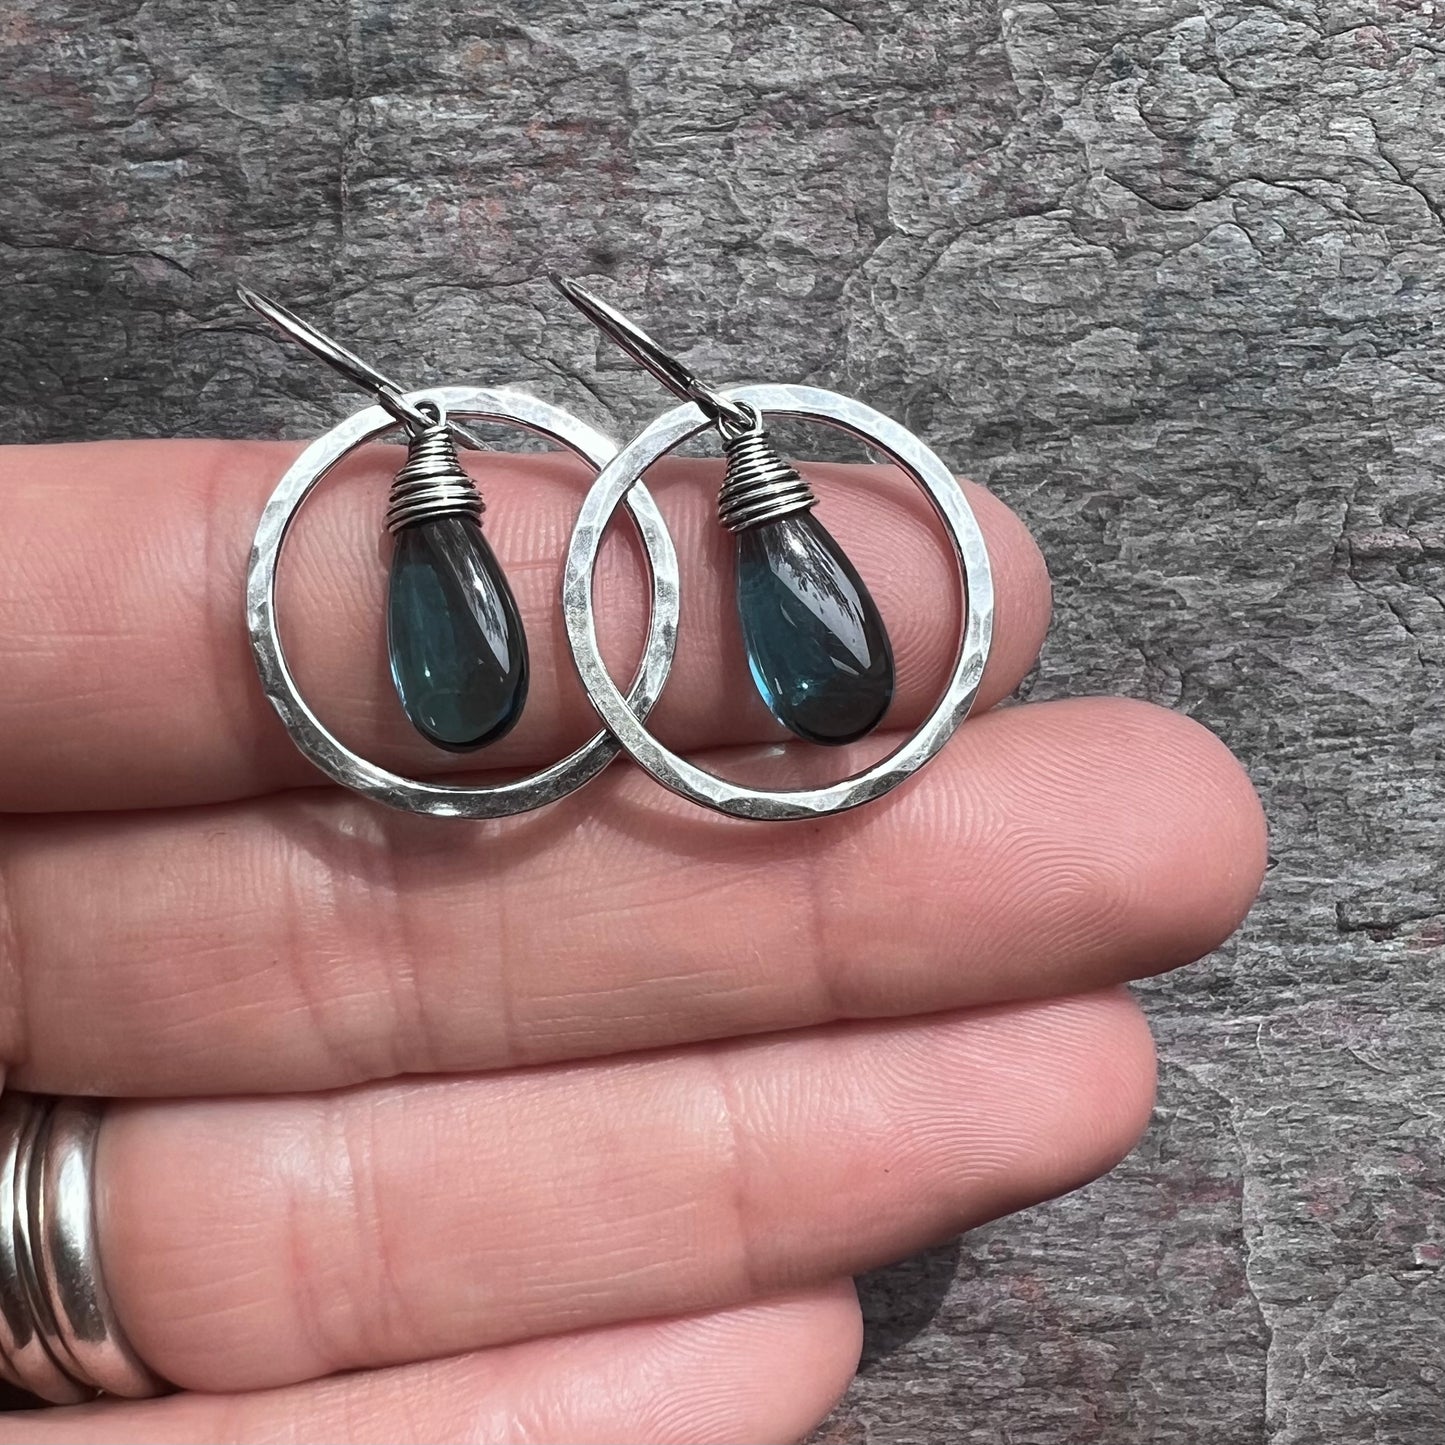 Sterling Silver and Vintage Glass Earrings - Teal Teardrops in Hammered Sterling Silver Circles